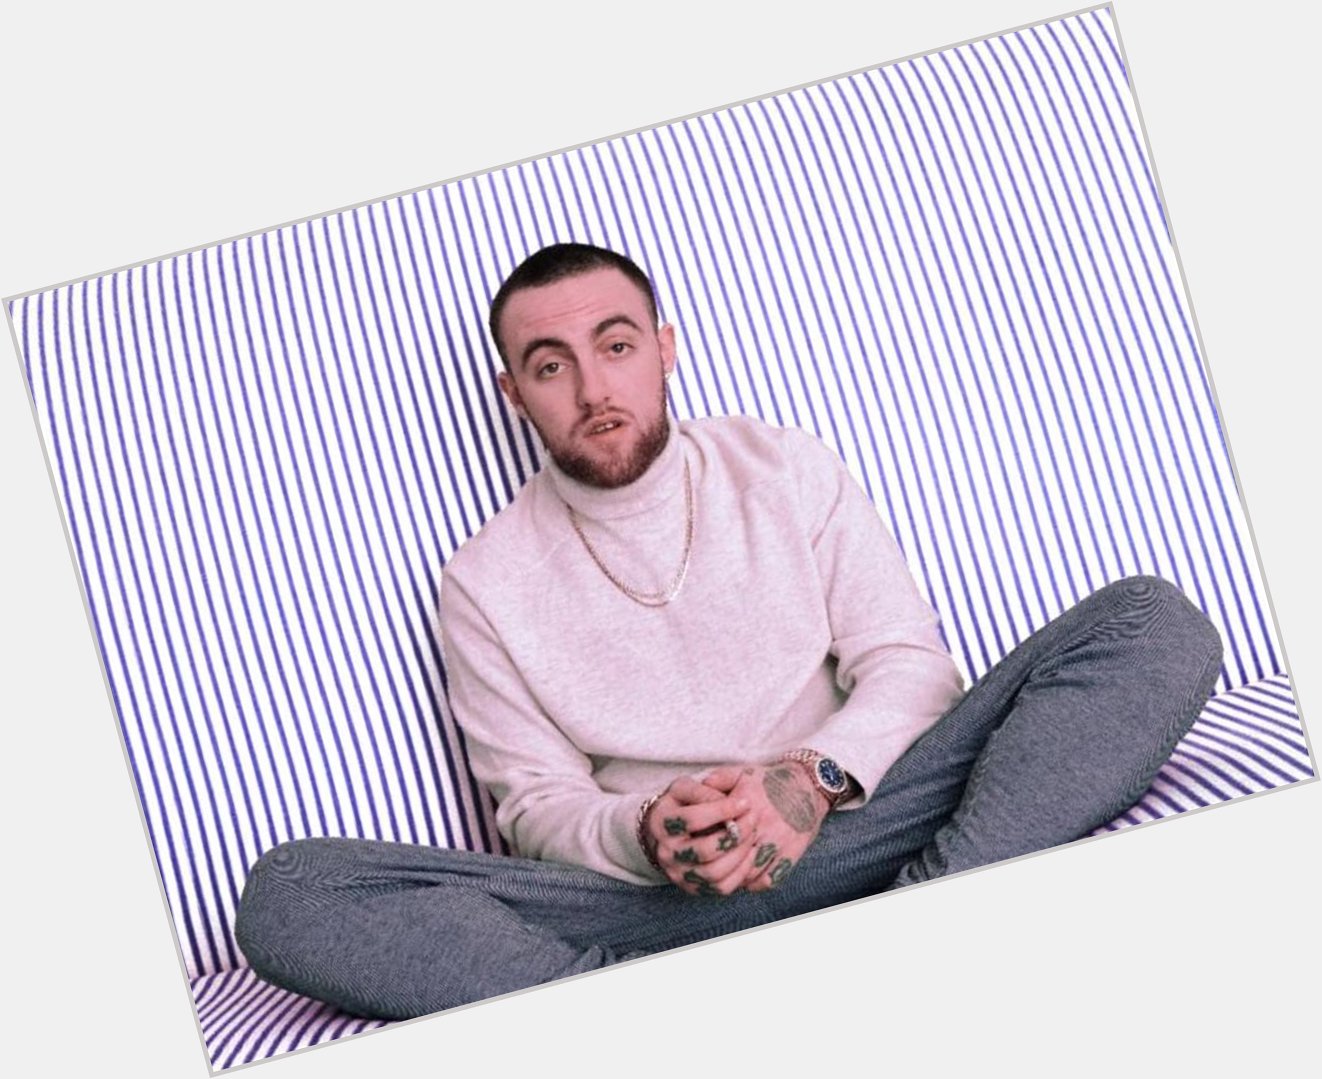 Happy Birthday to Mac Miller who would ve been 27 years old today. Rest In Peace 